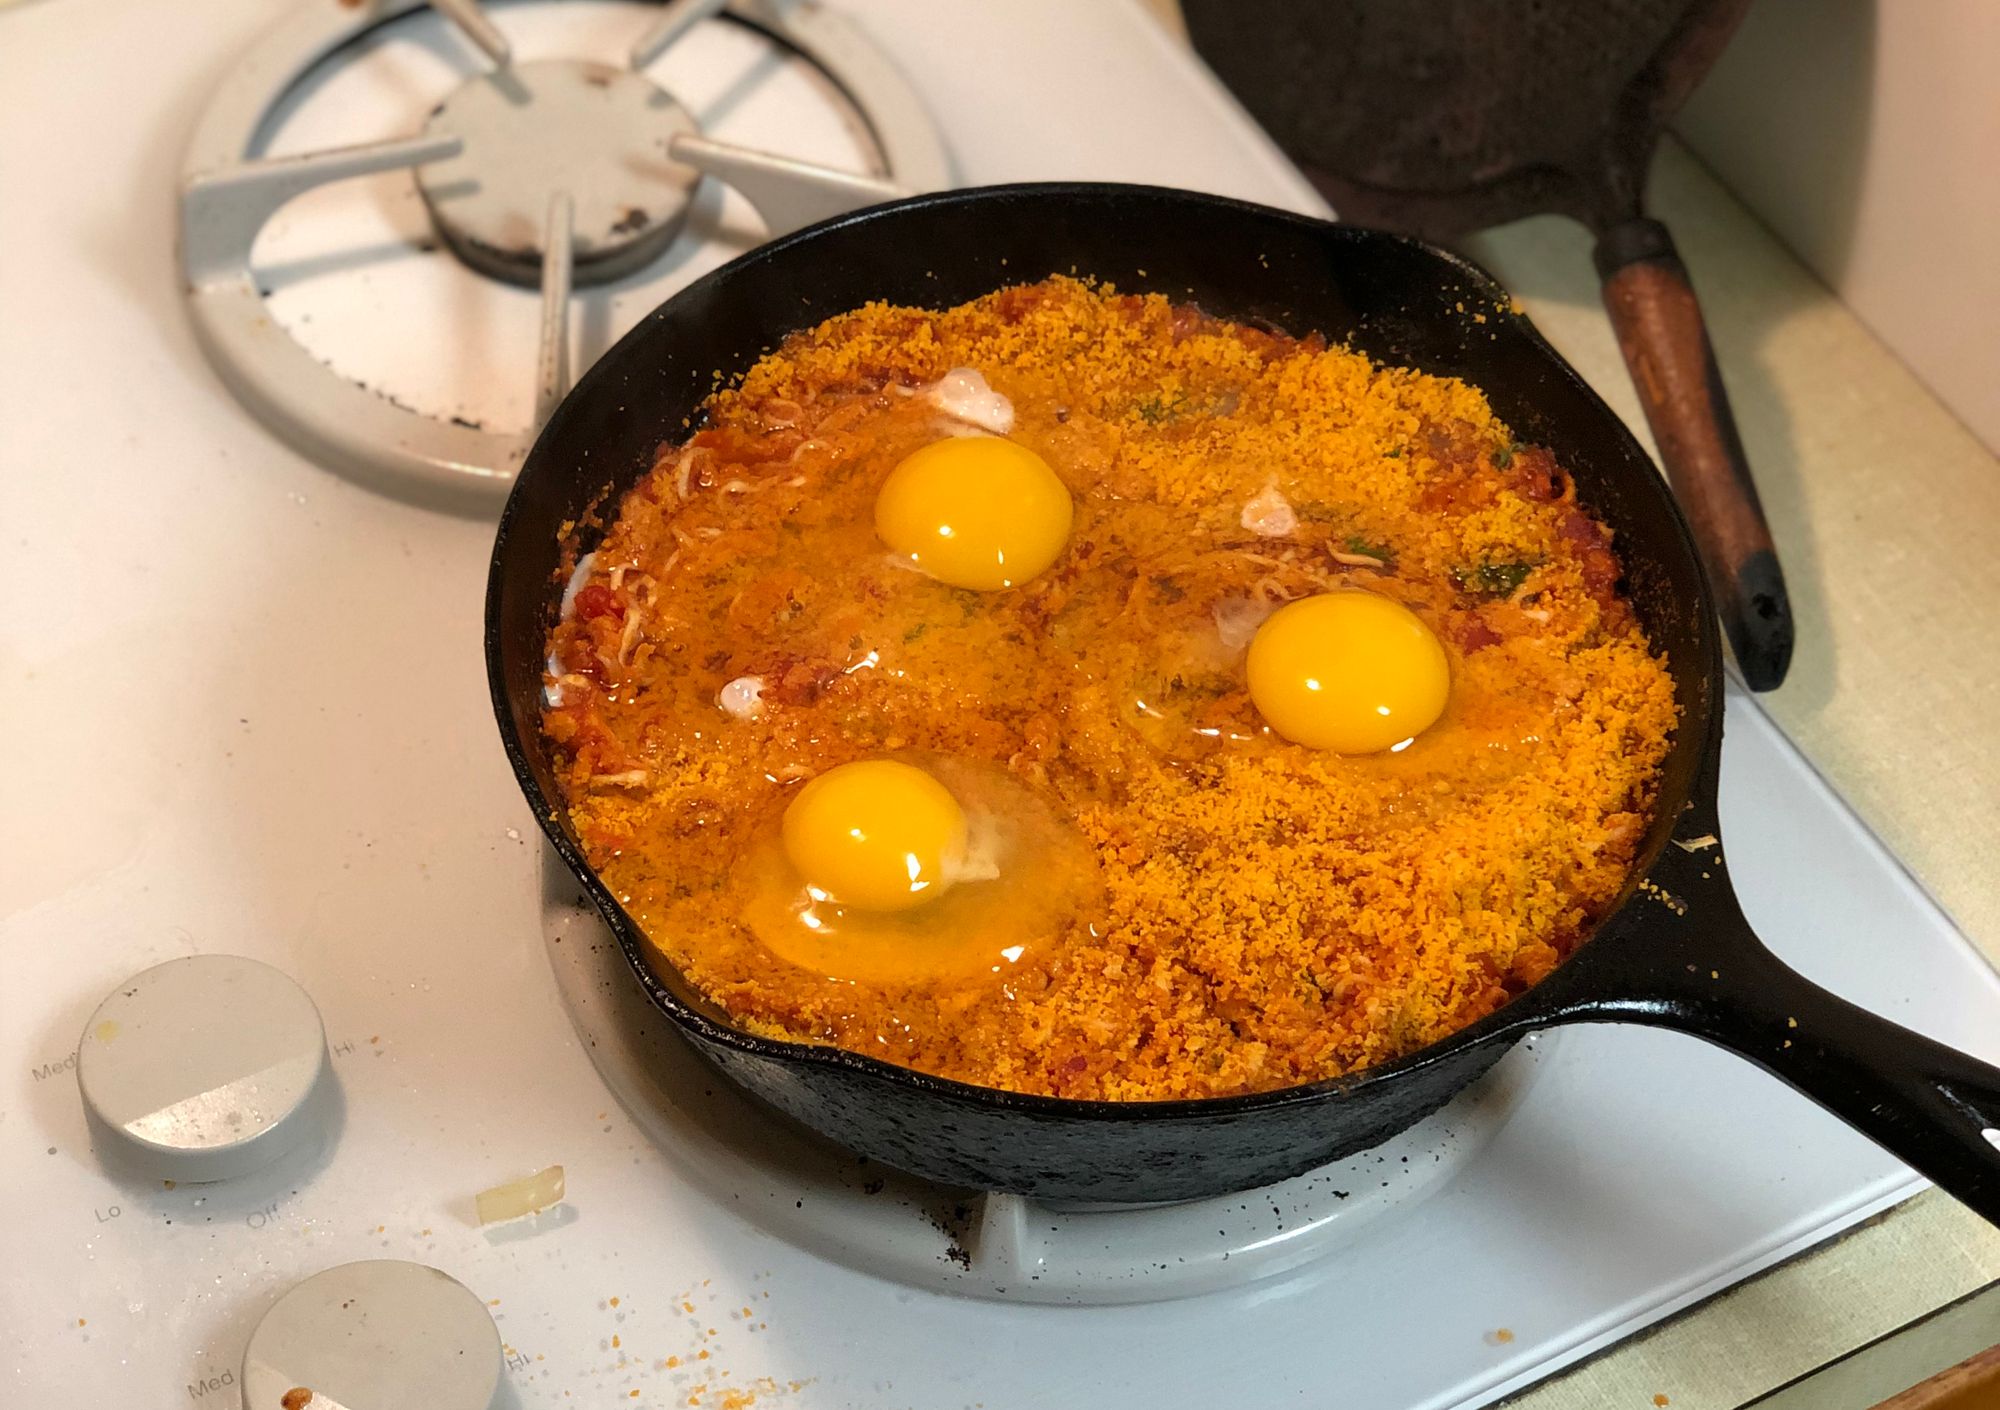 Making shakshuka with Cheez-Its and instant ramen